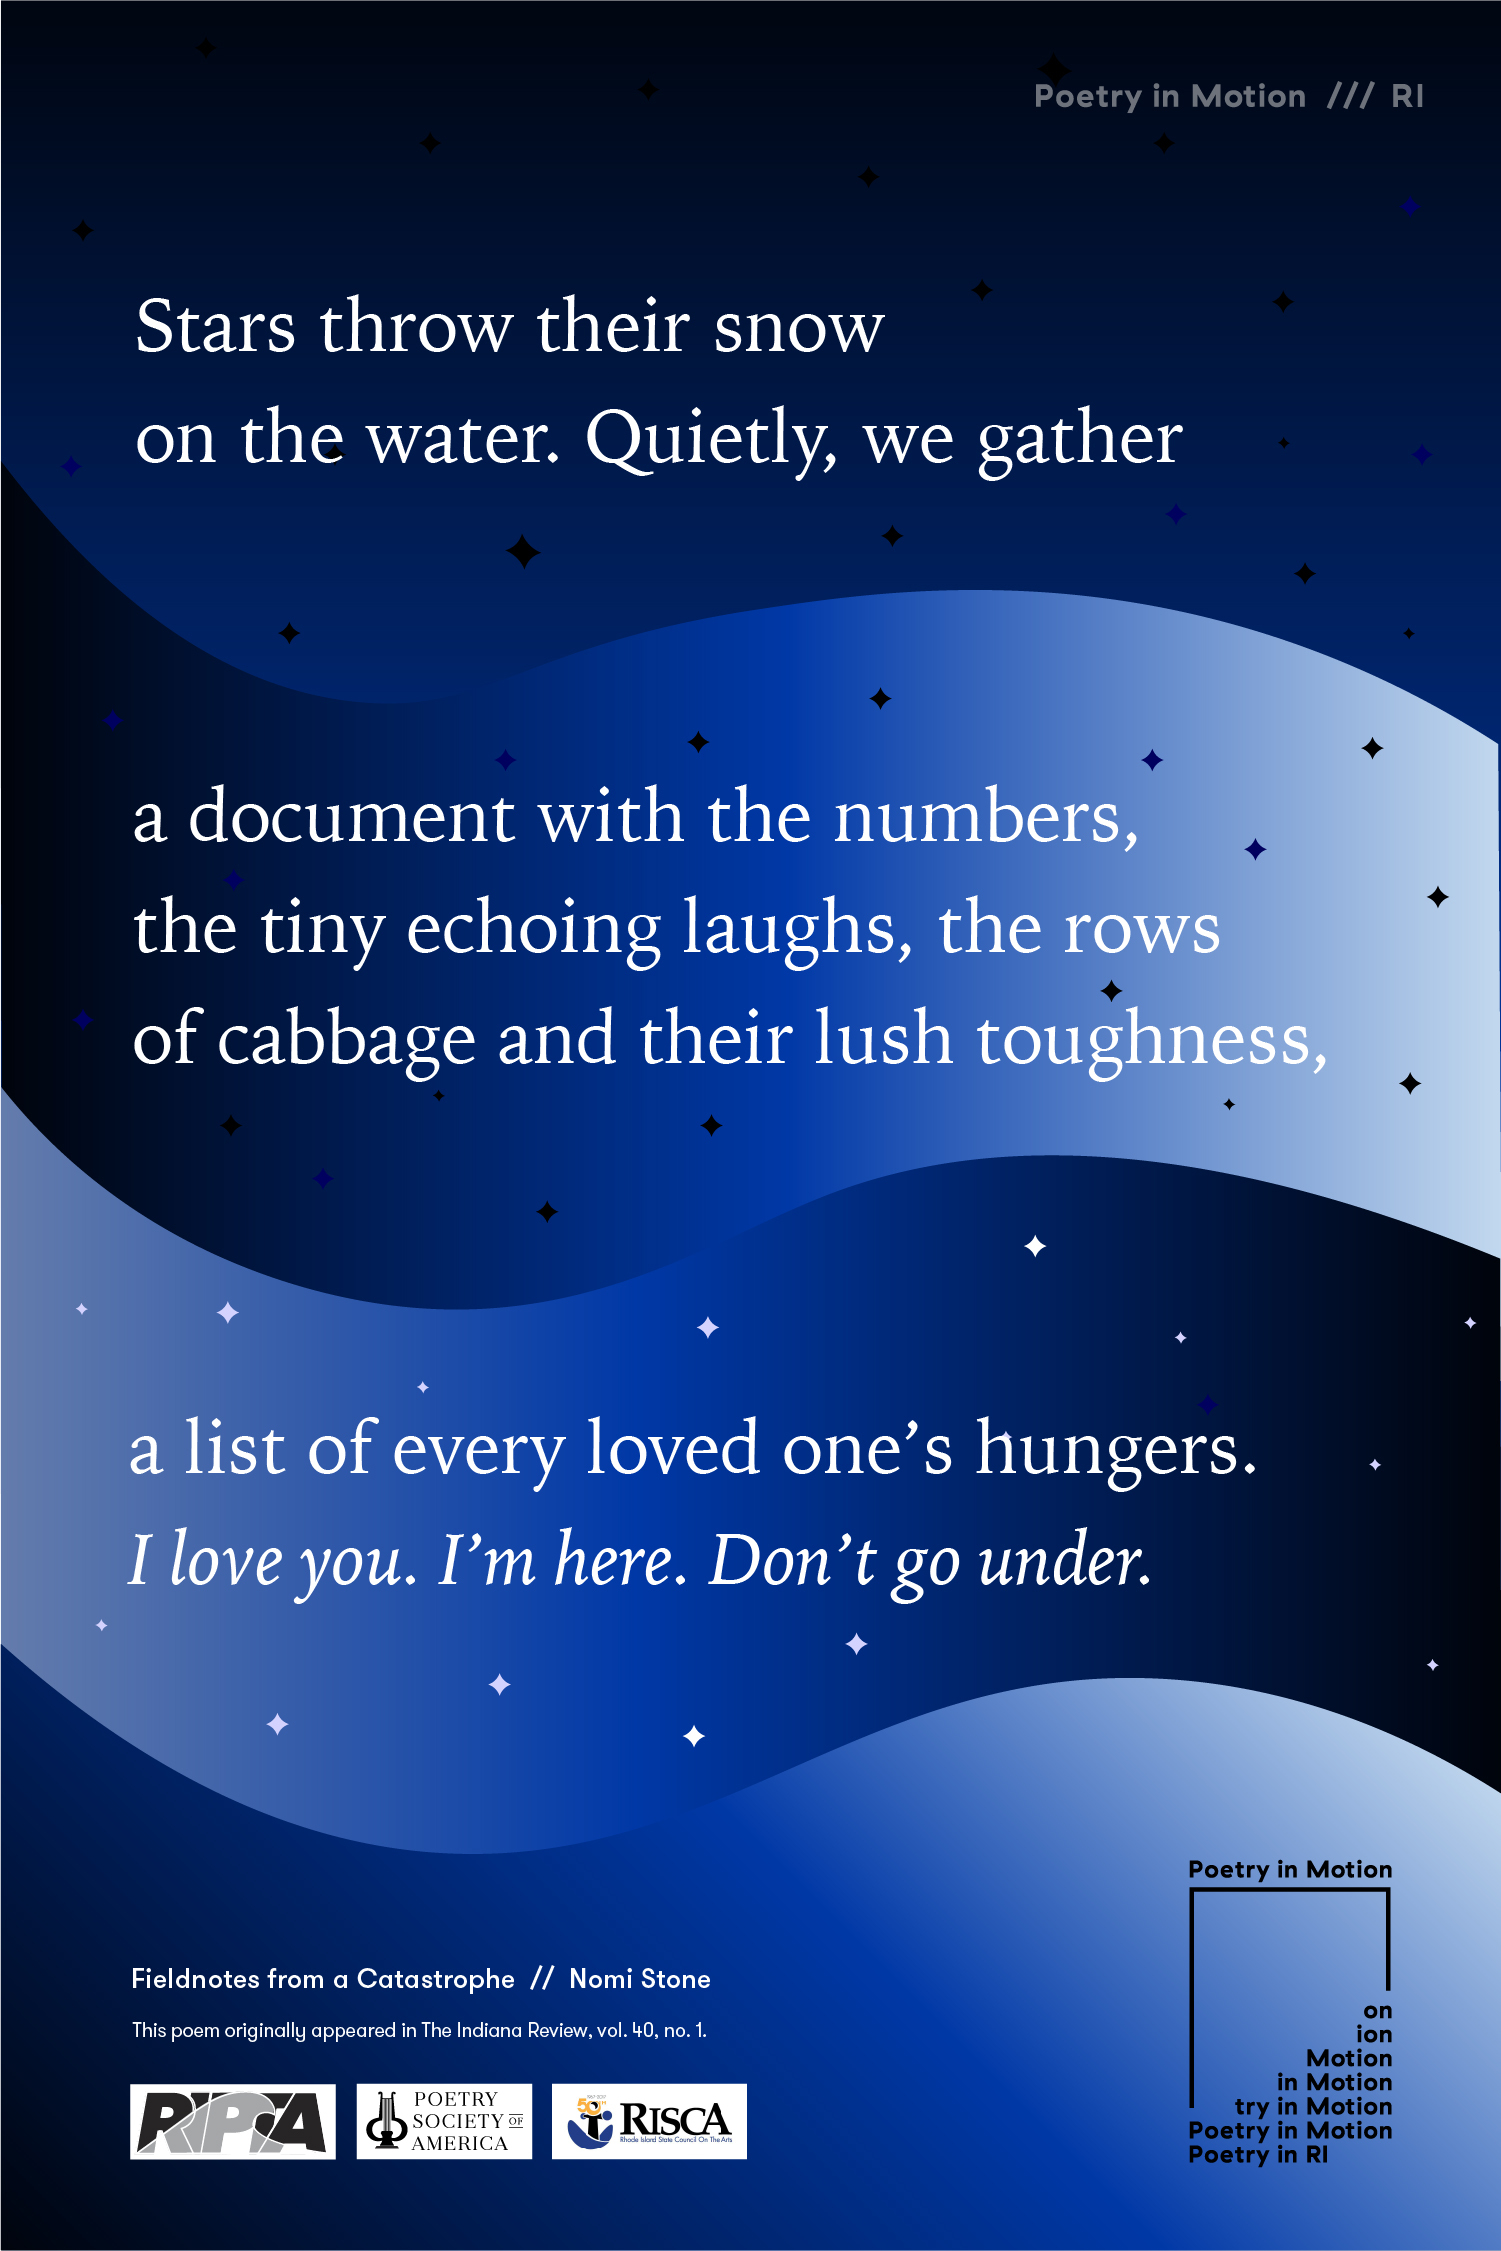 A poster in shades of blue decorated with small black diamonds features the poem, Fieldnotes from a Catastrophe by Nomi Stone.